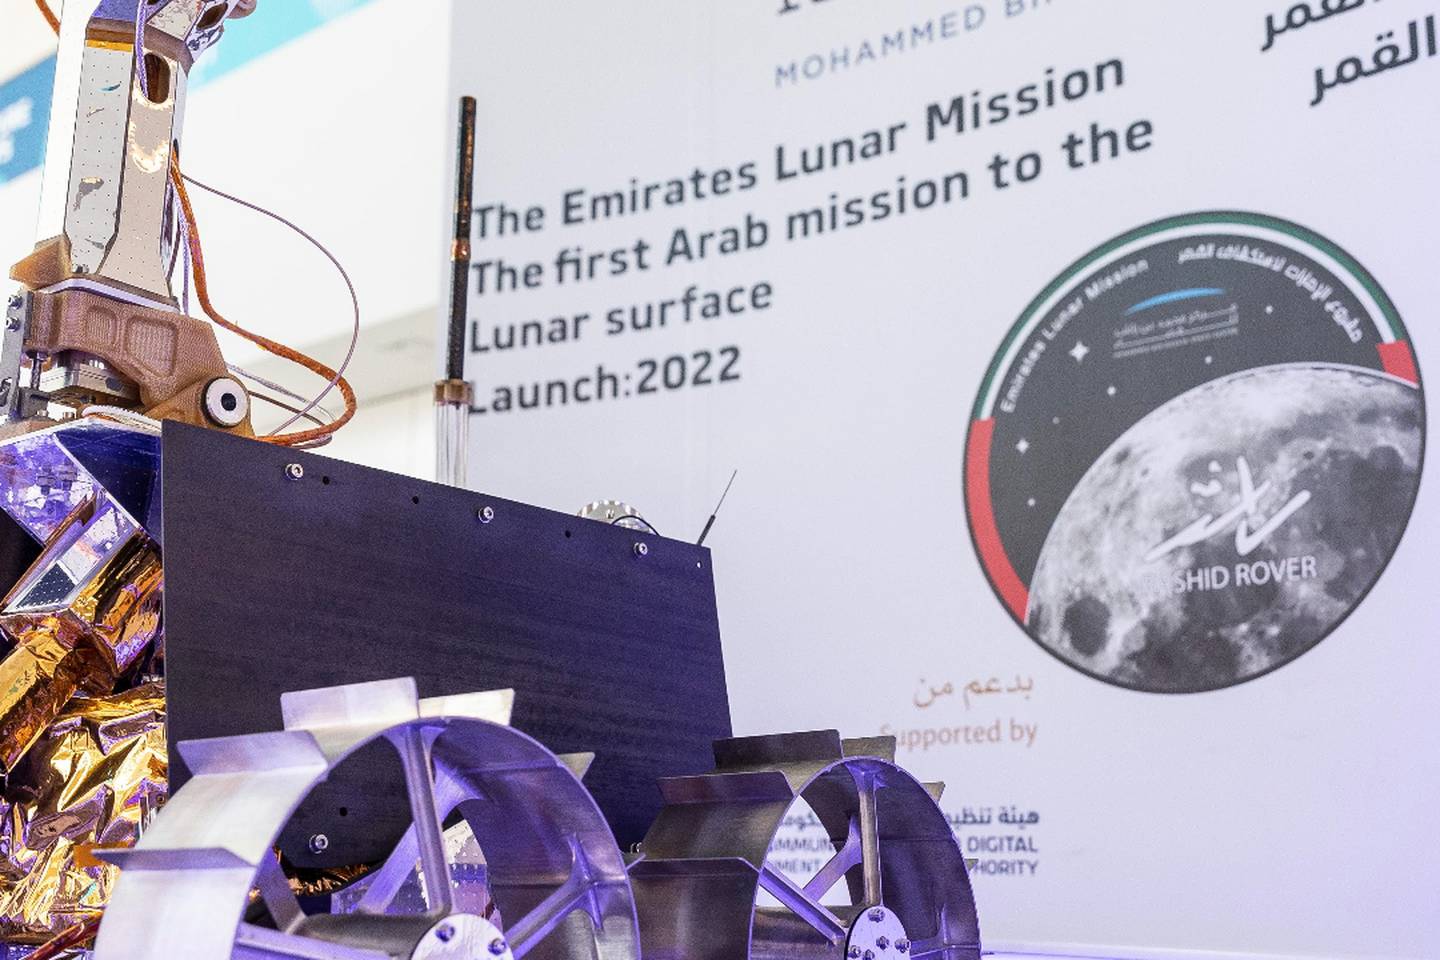 Timelapse footage shows how the UAE's lunar rover was built